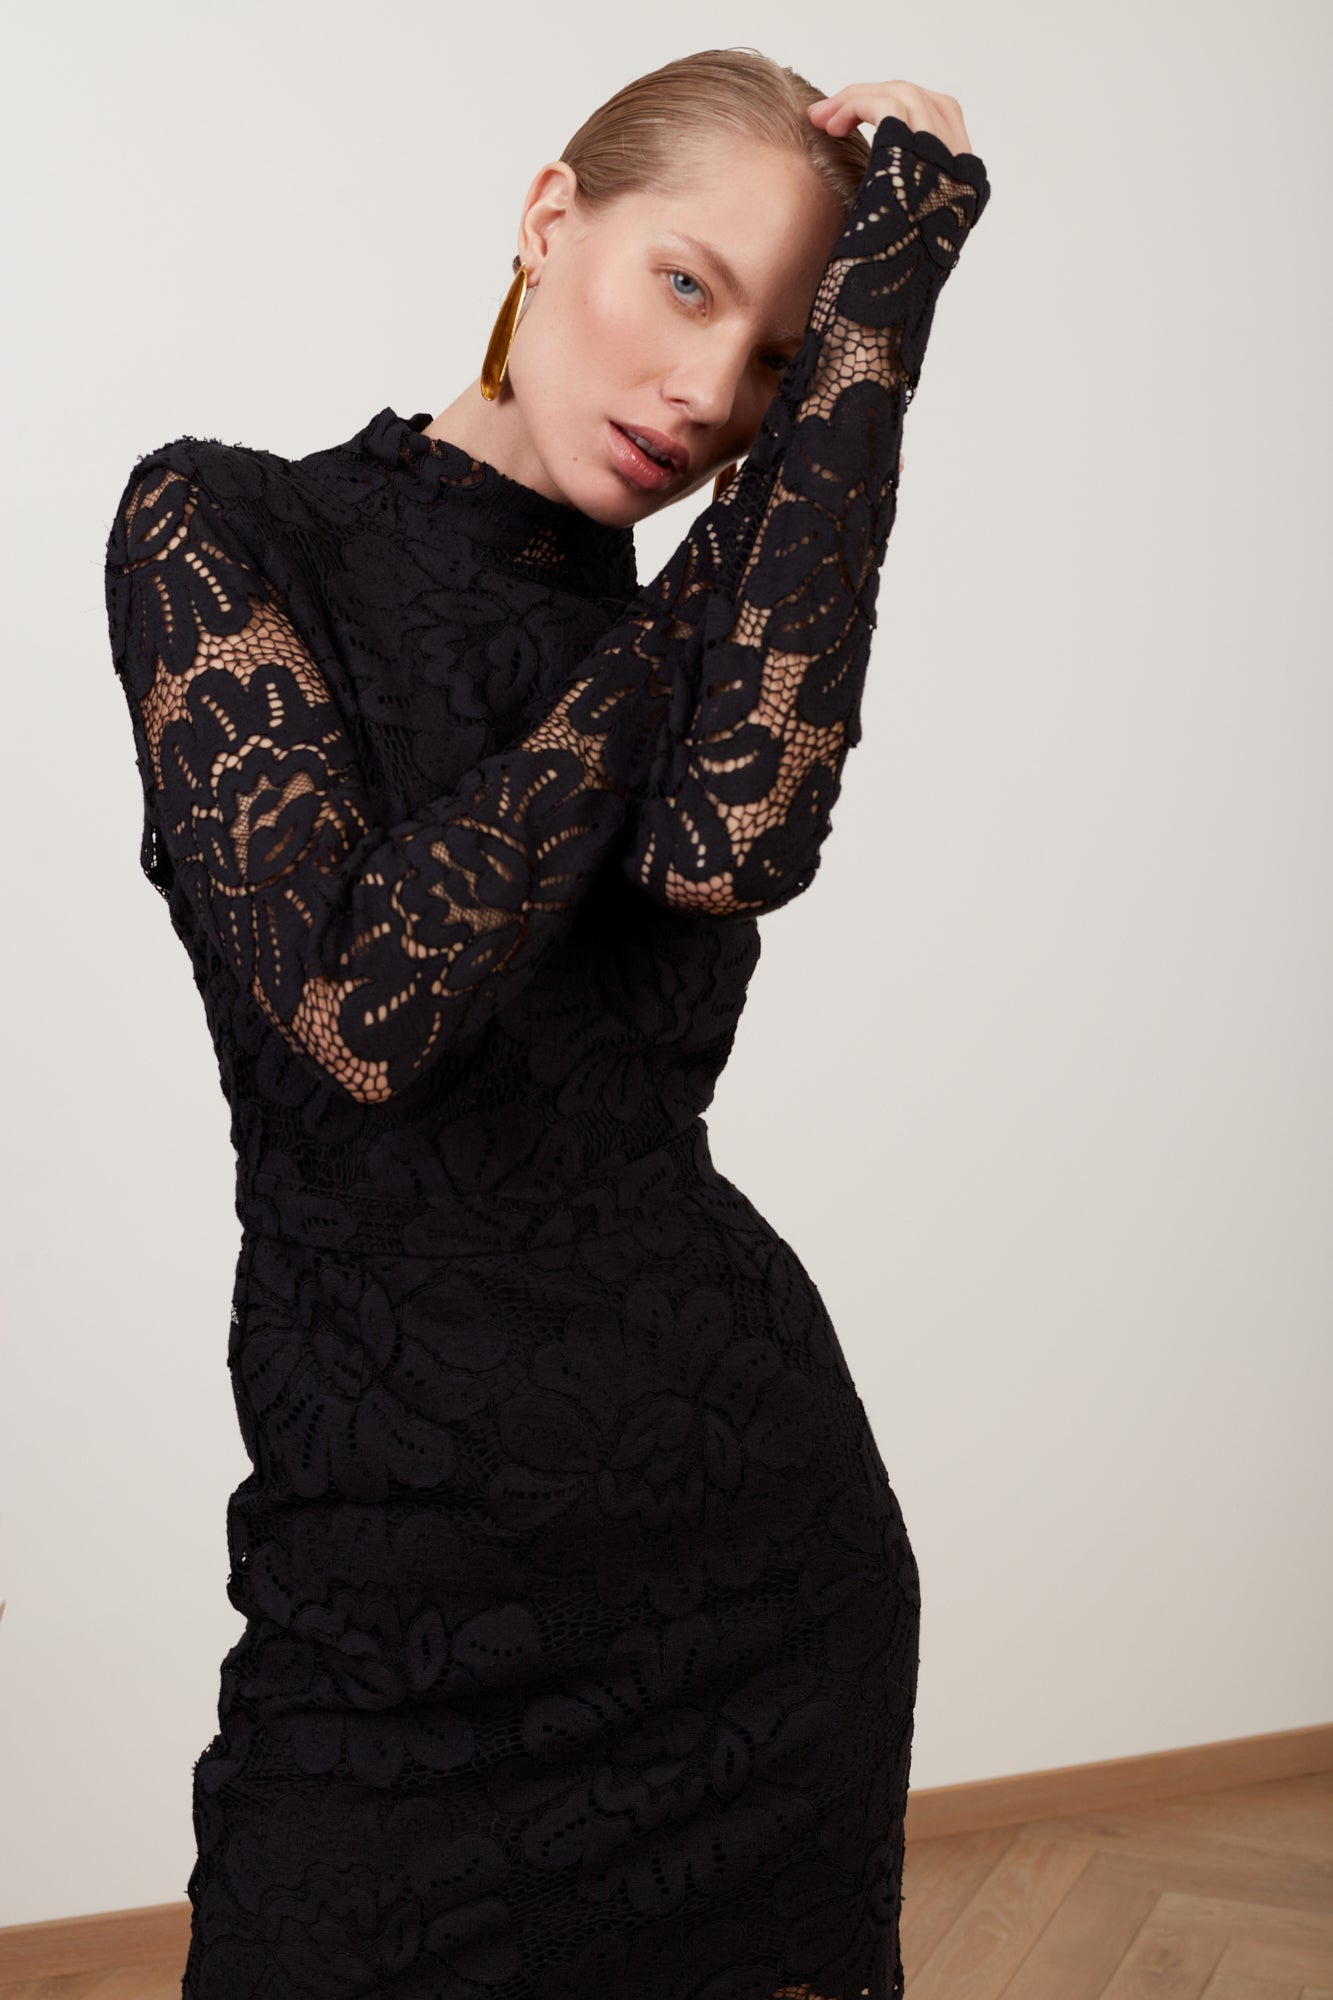 SERIN mini dress from black floral lace